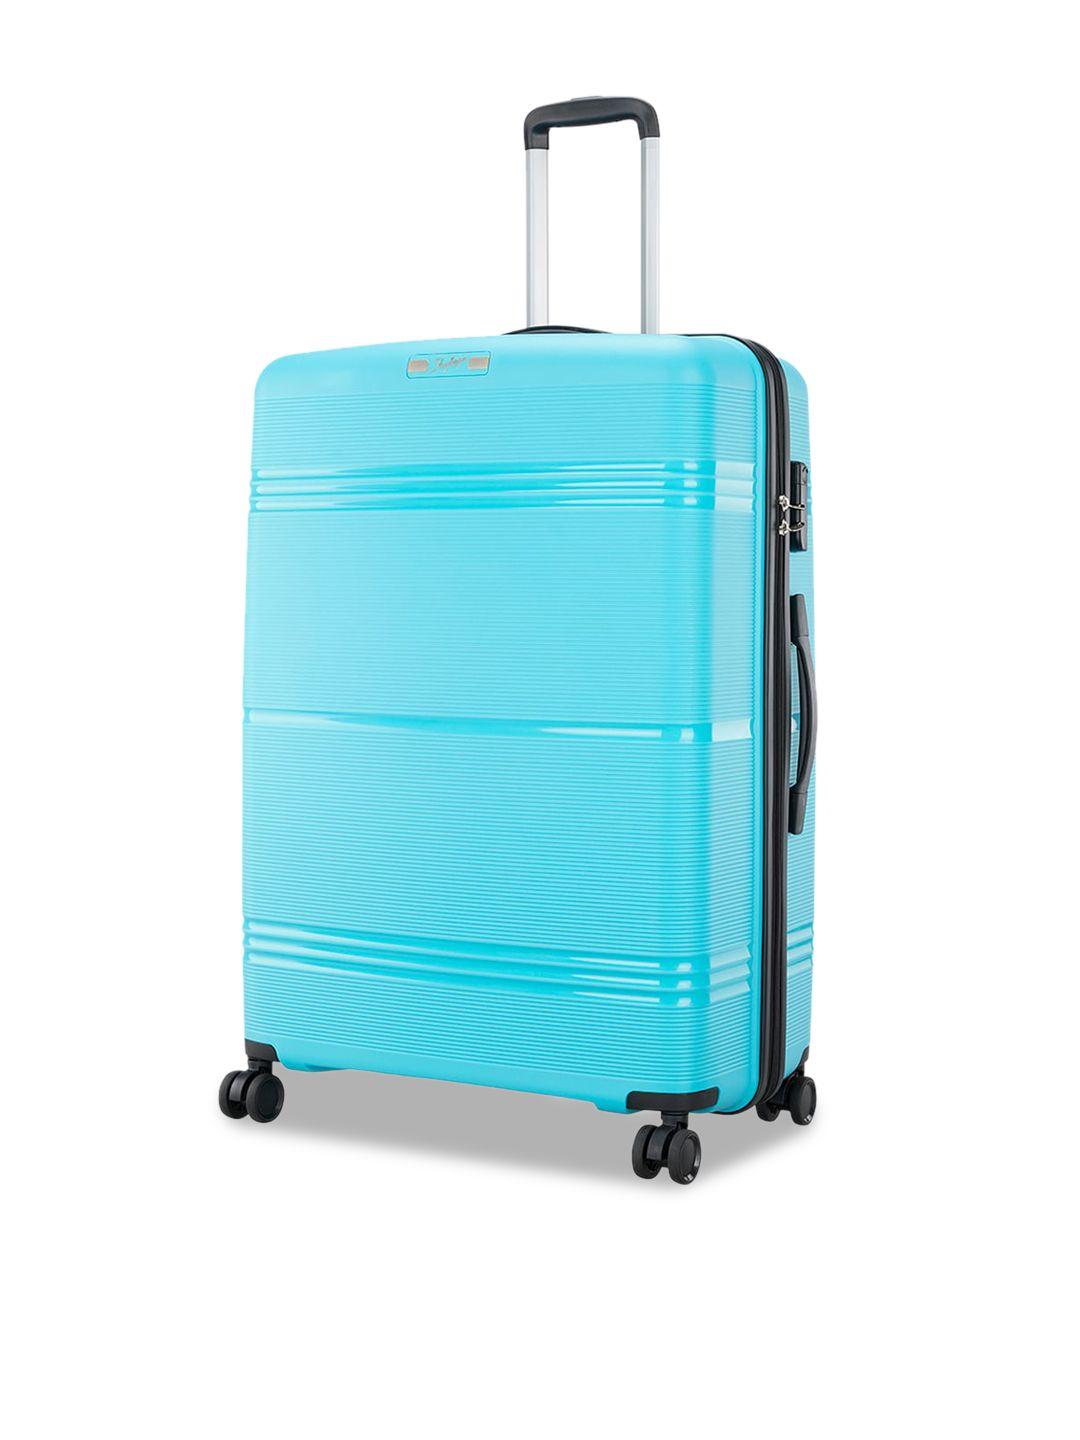 skybags-textured-hard-sided-large-trolley-suitcase